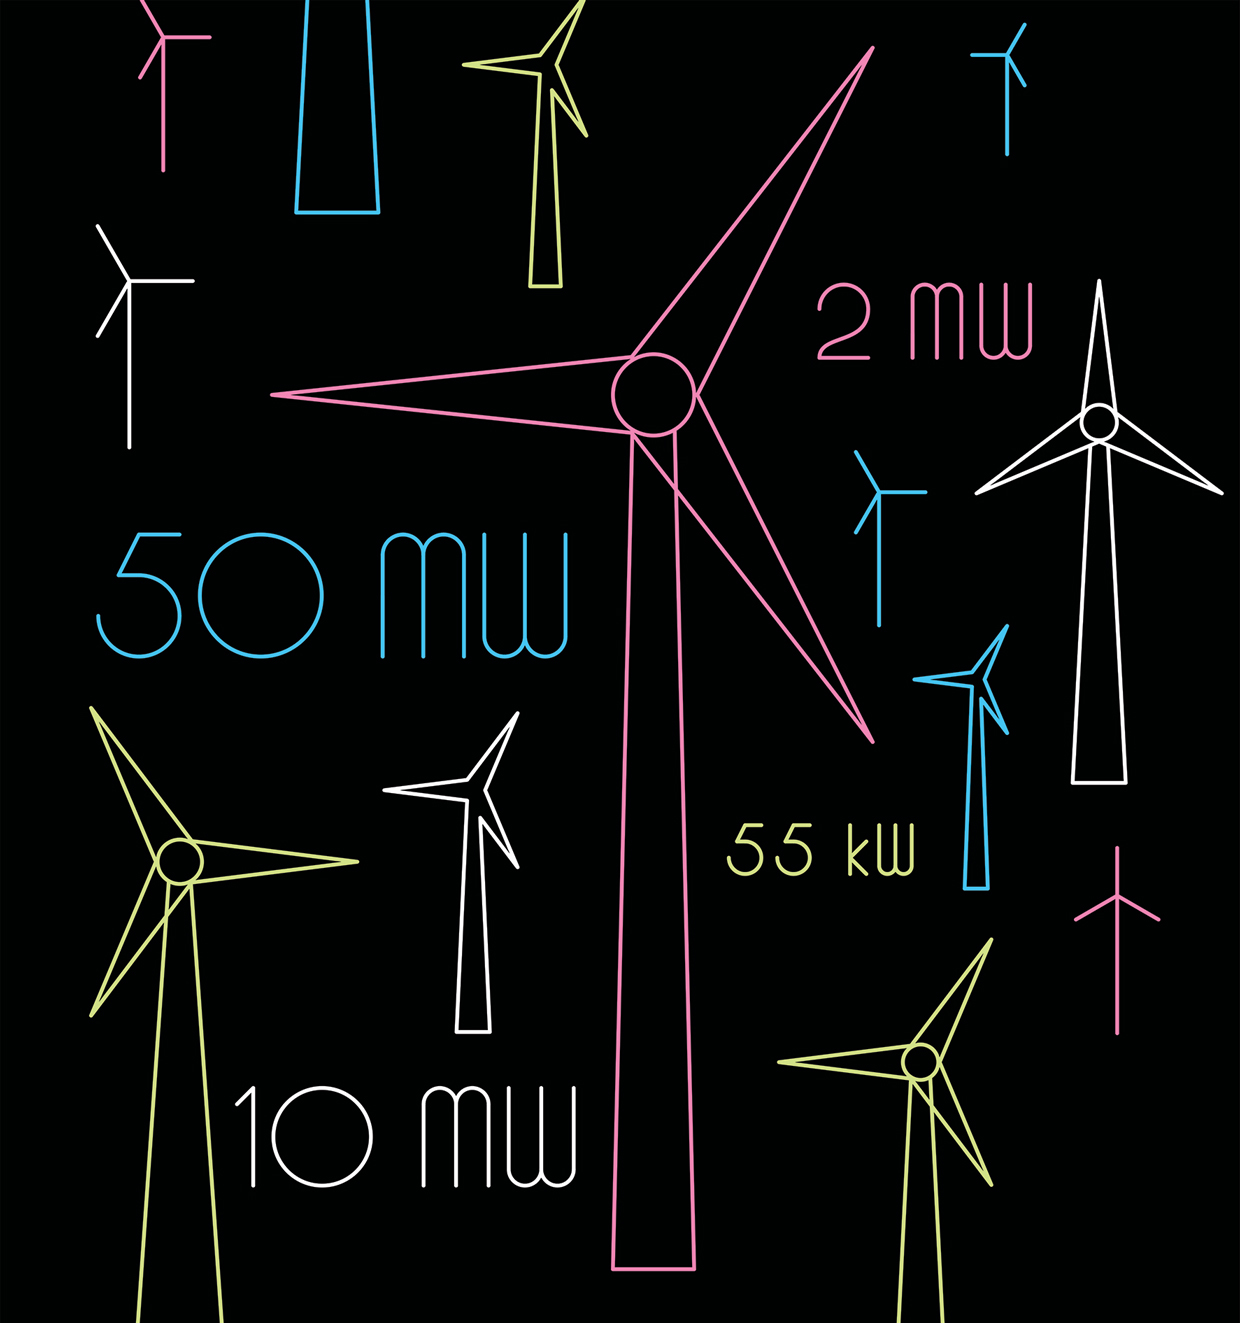 Wind Turbines Just Keep Getting Bigger, But There's a Limit - IEEE Spectrum